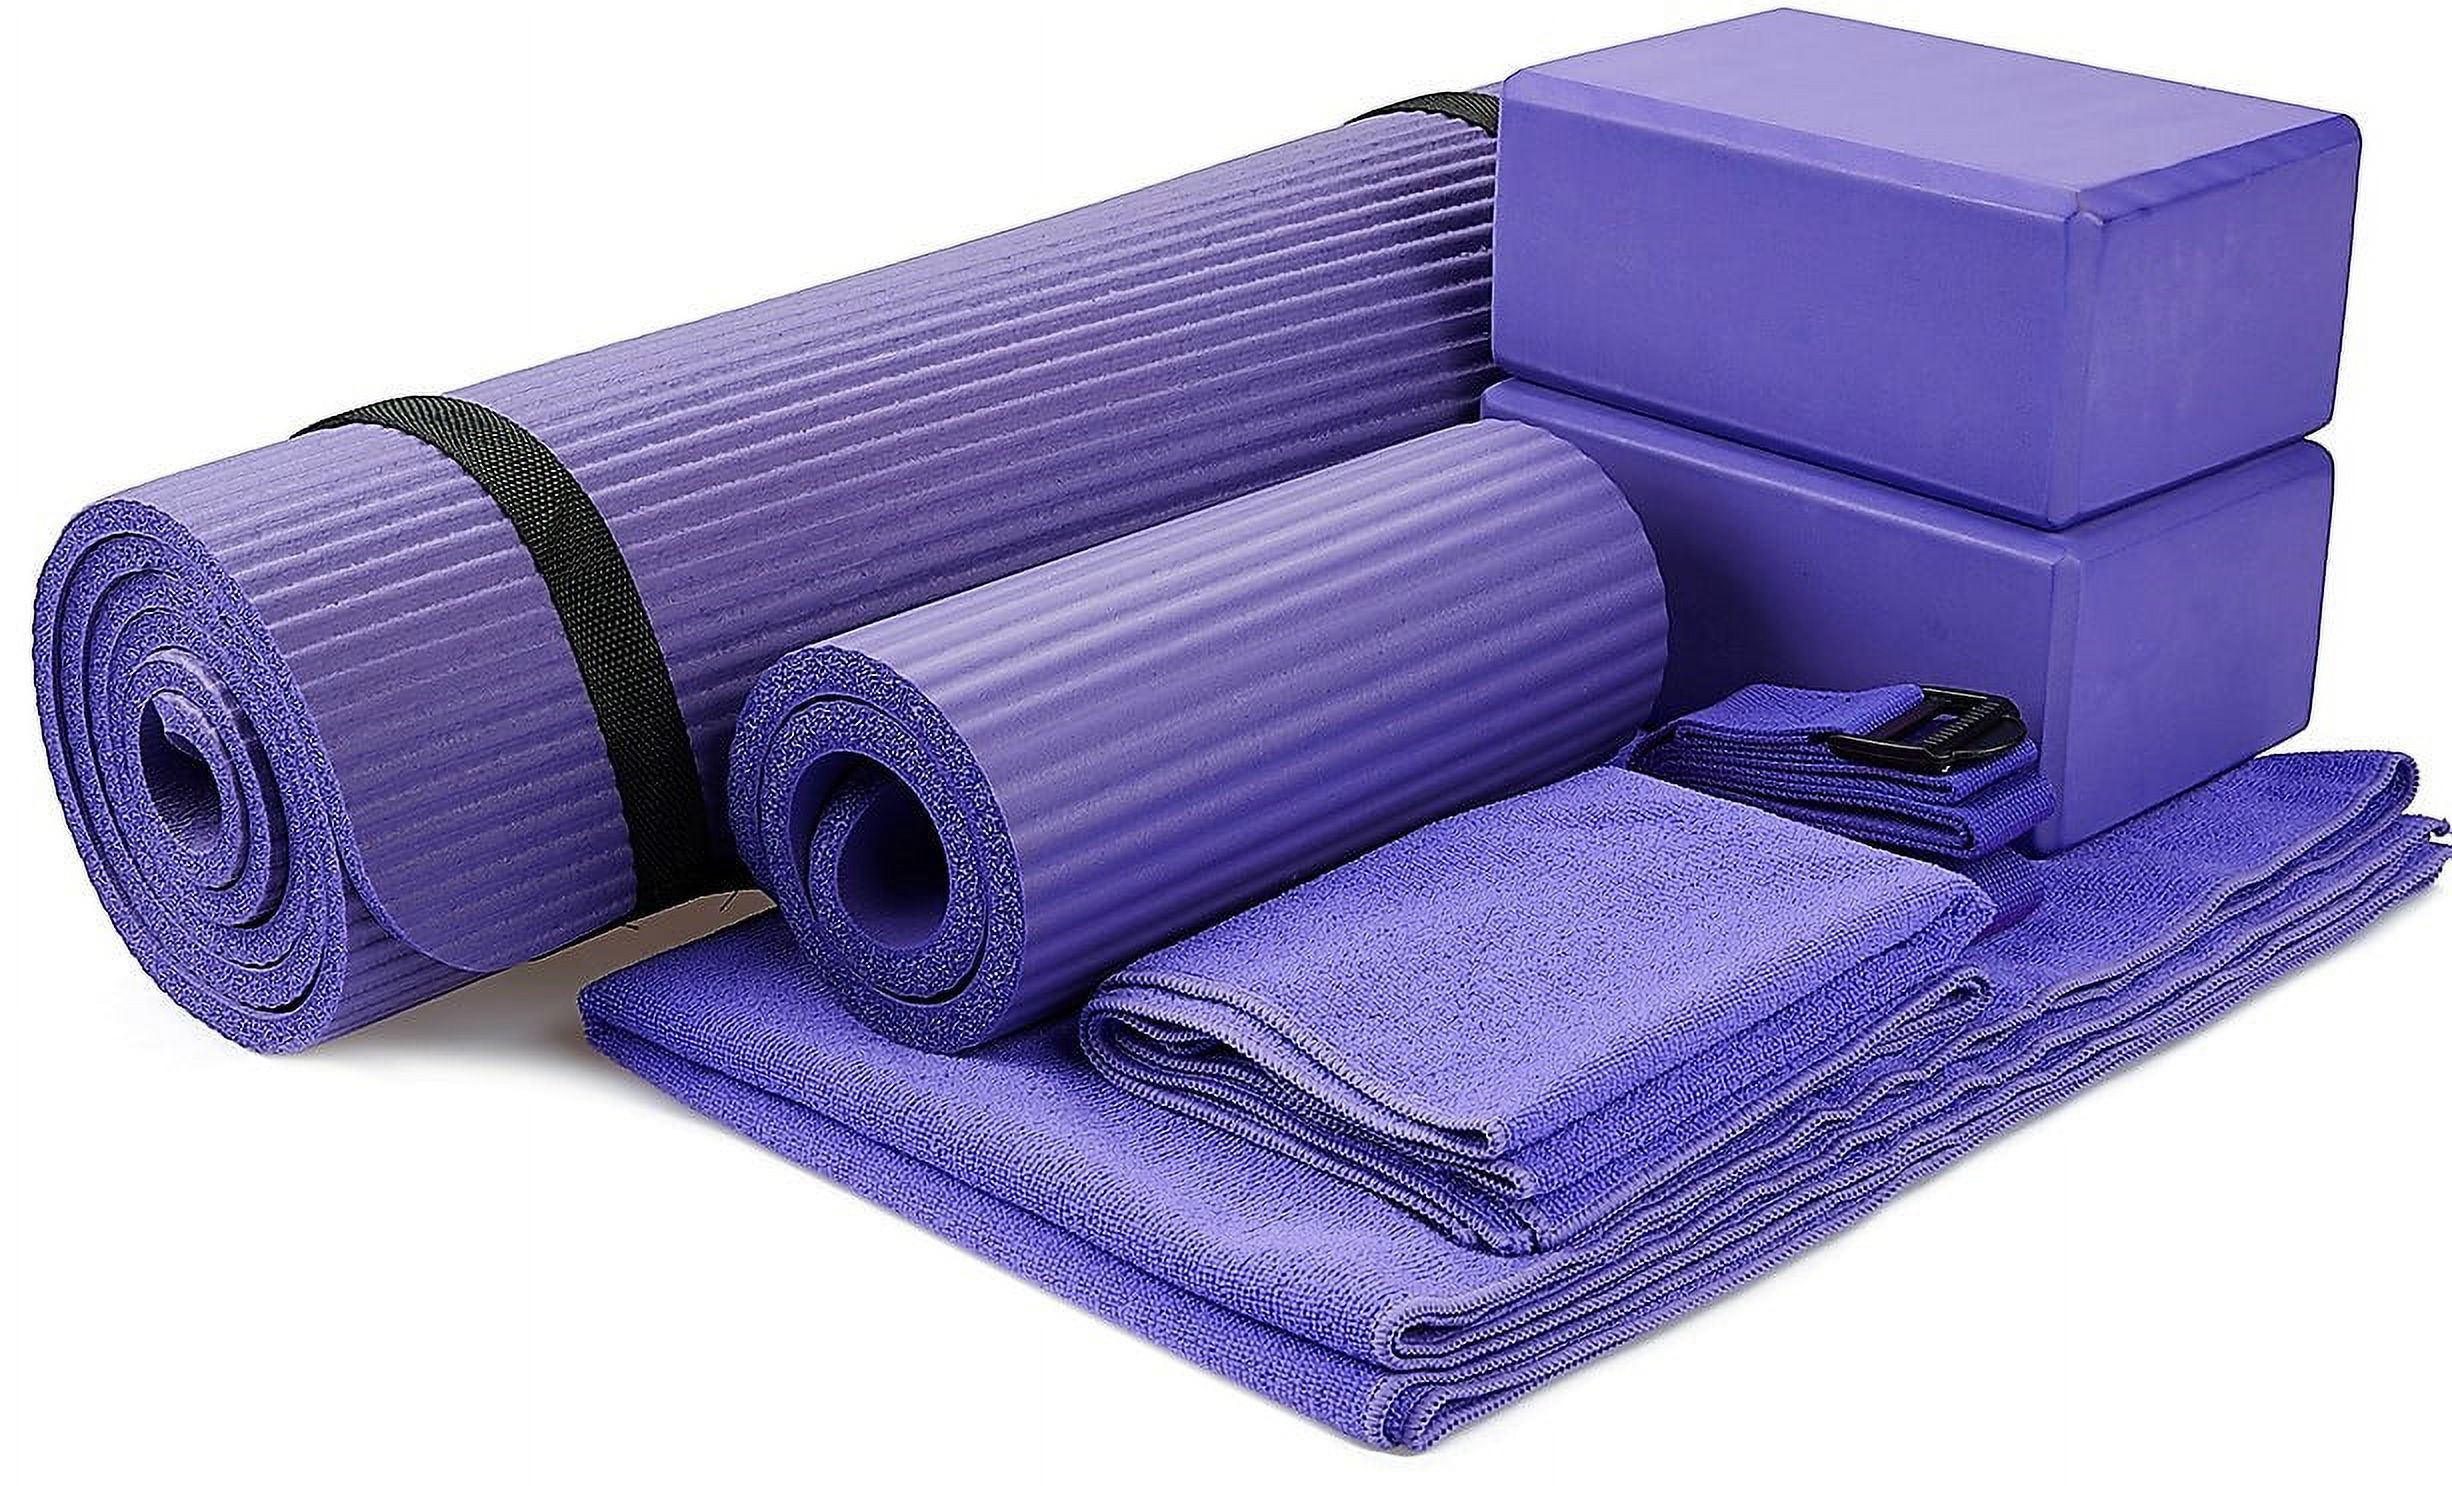 Everyday Essentials Go Yoga 7-Piece Set - Include Yoga Mat with Carrying Strap, 2 Yoga Blocks, Yoga Mat Towel, Yoga Hand Towel, Yoga Strap and Yoga Knee Pad - image 1 of 6